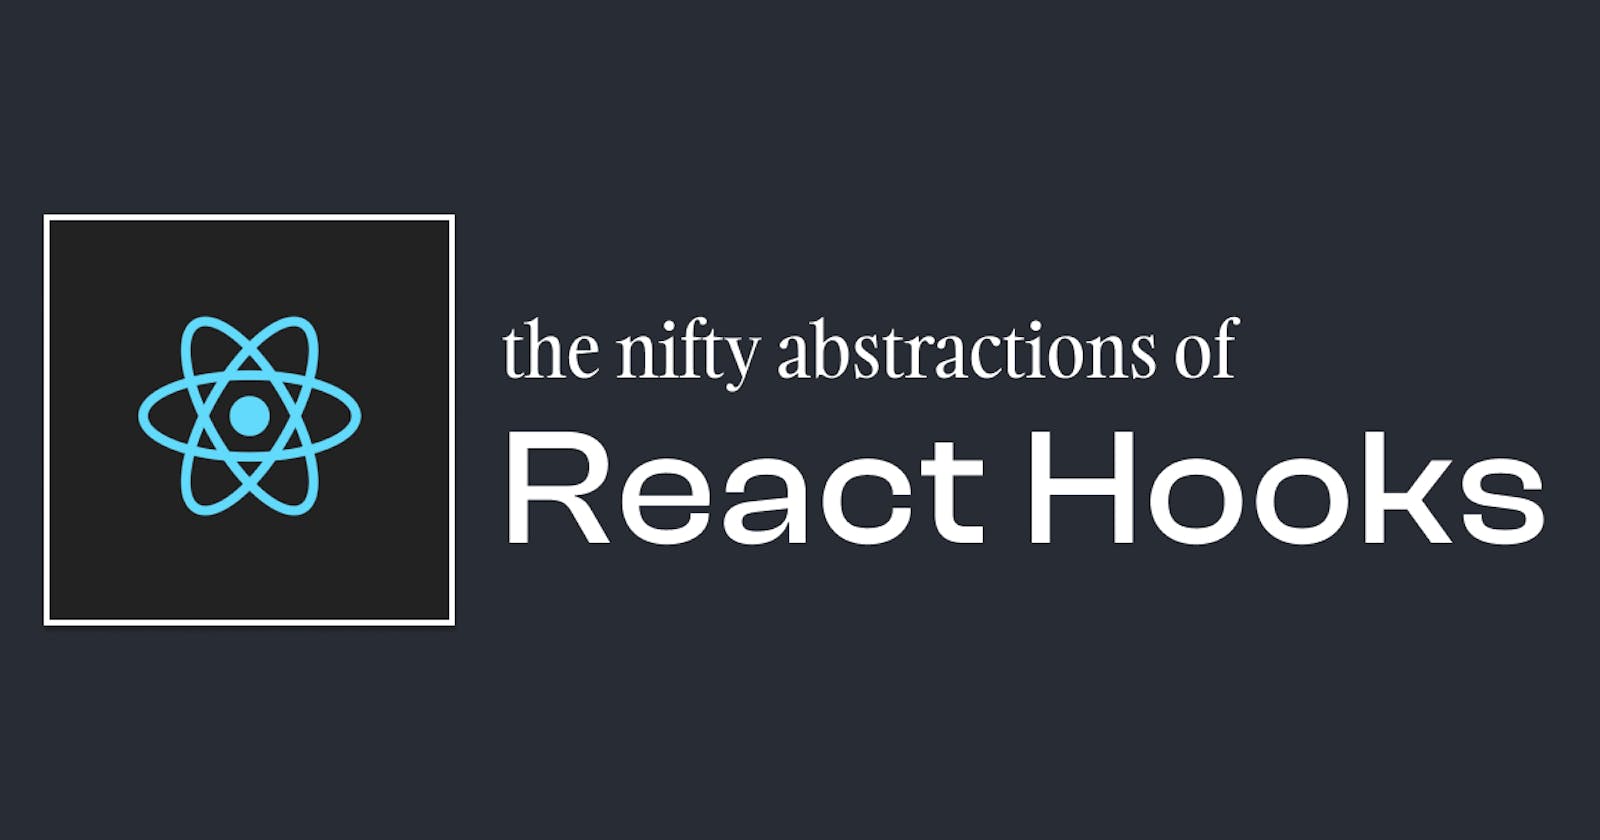 The nifty abstractions of React hooks